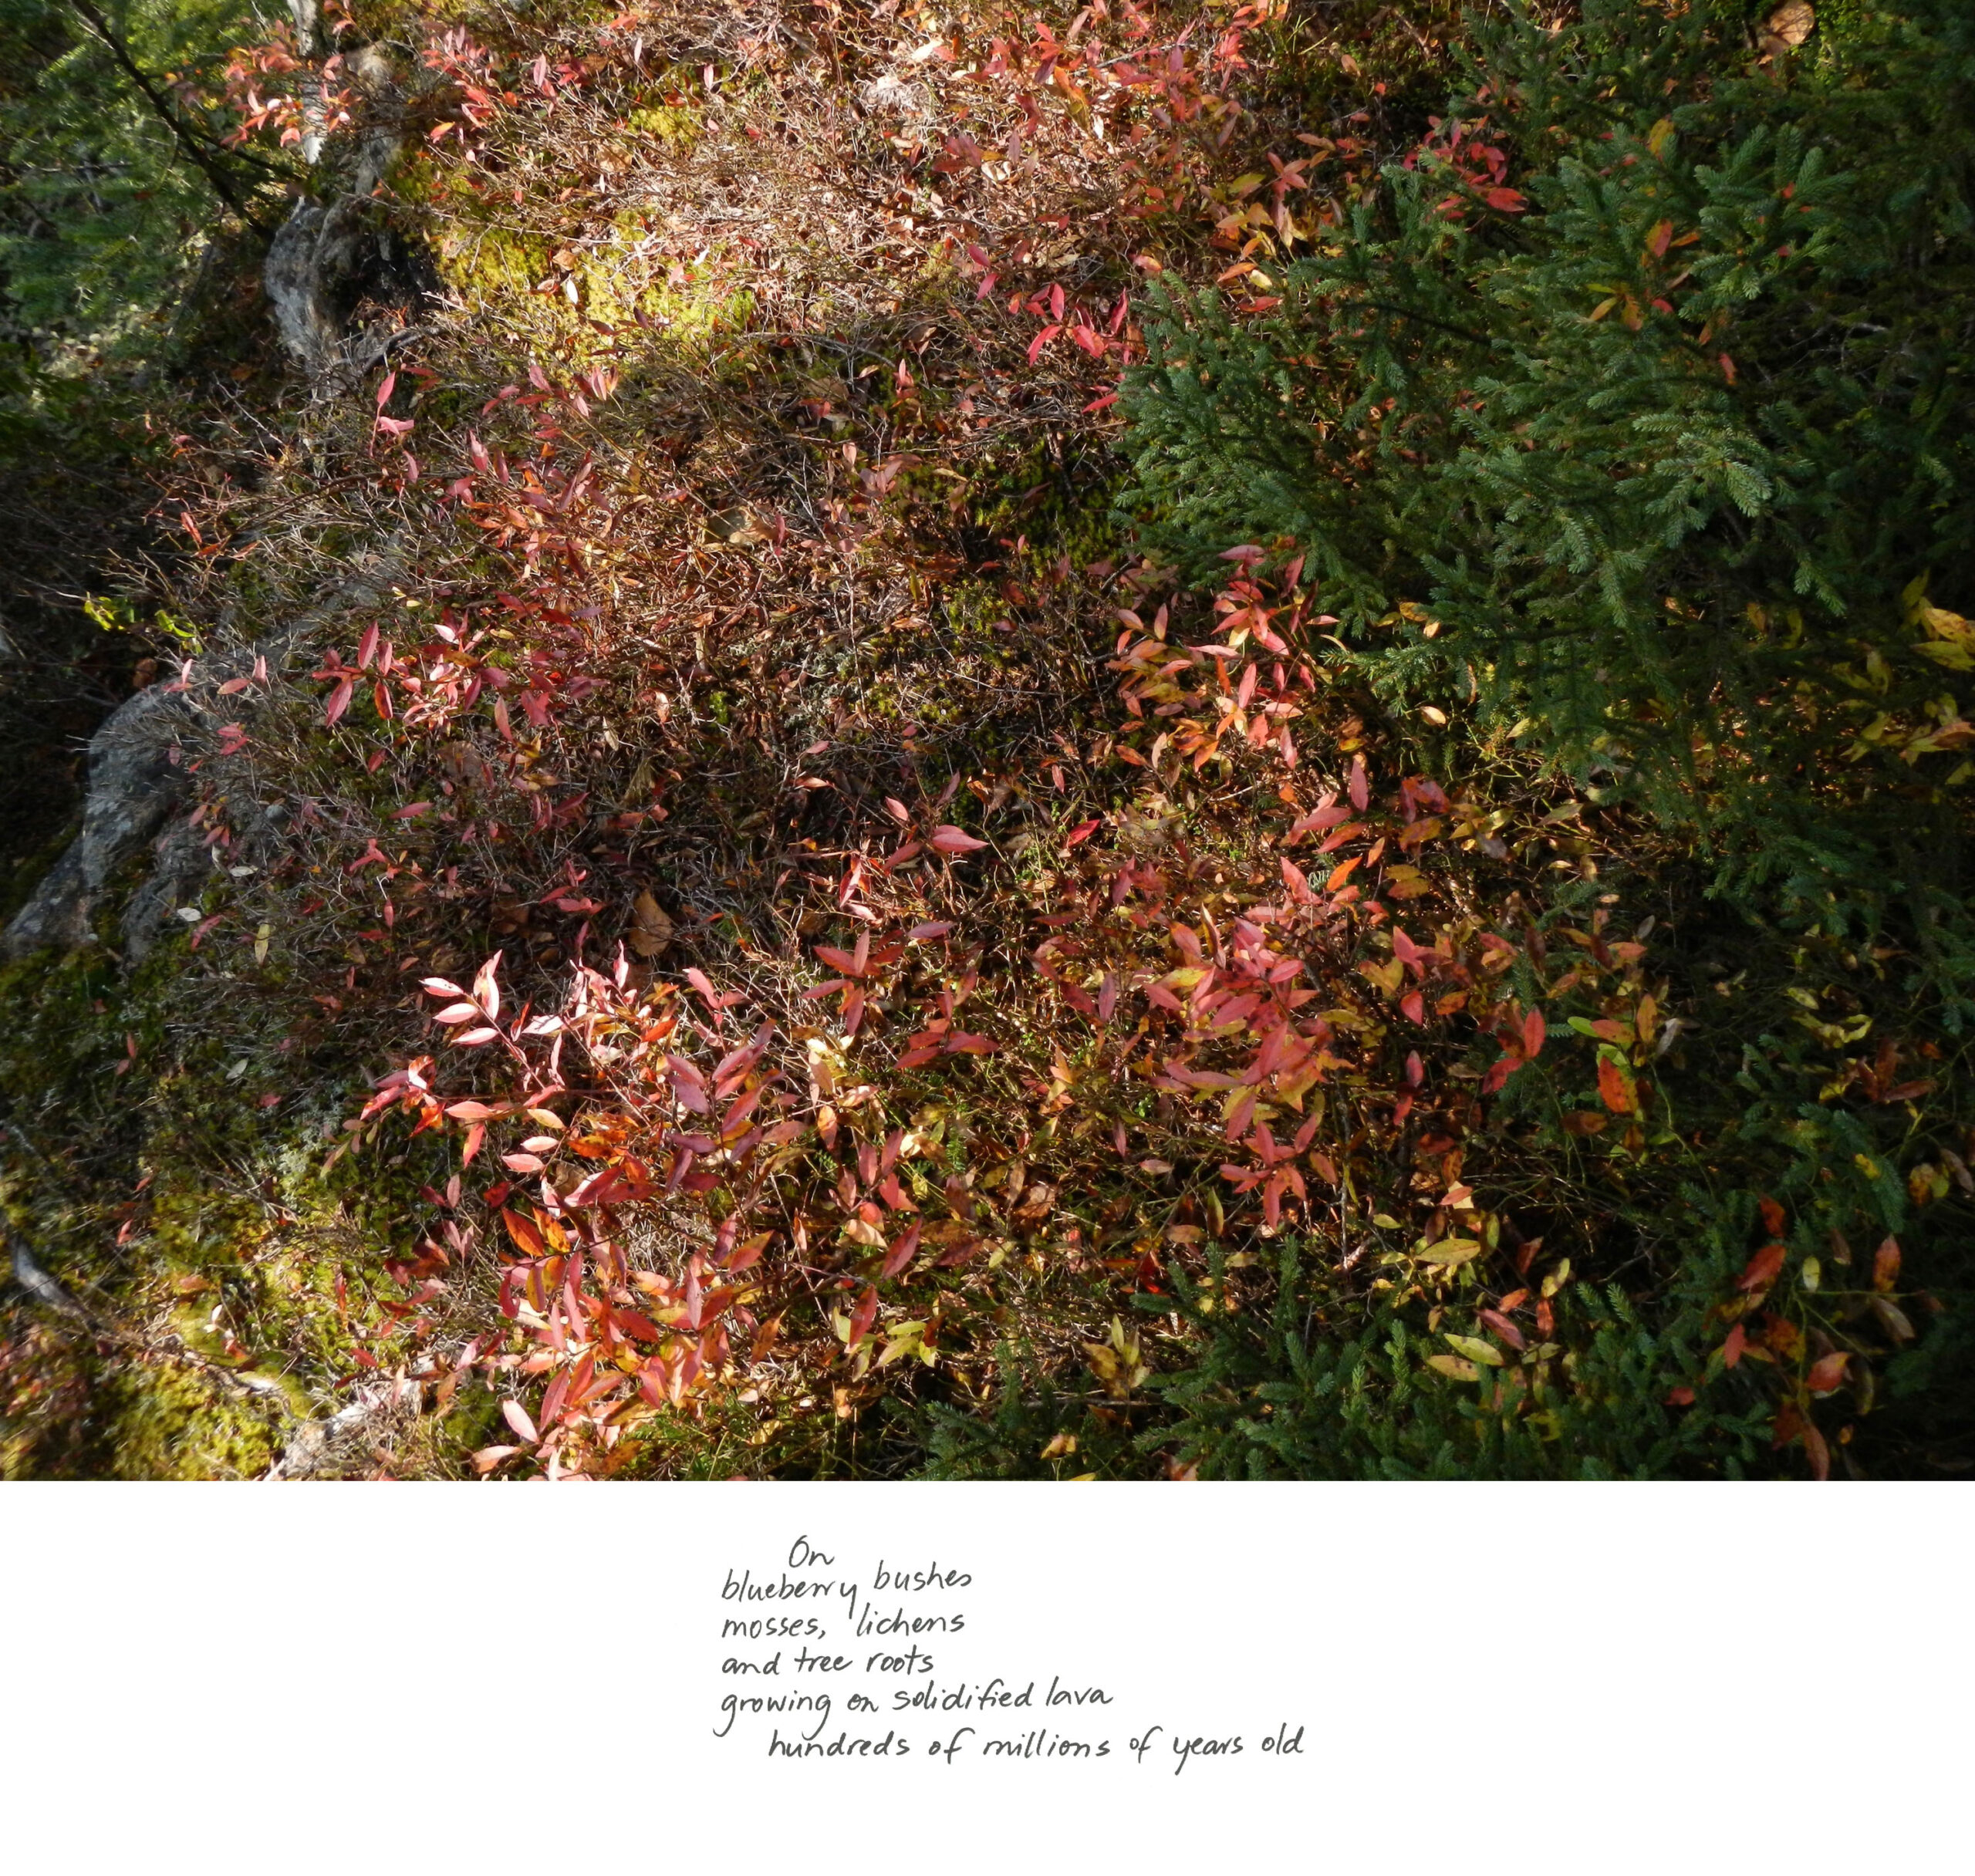 Marlene Creates, At the Bottom of the Droke, Autumn 2020, (inkjet print with handwritten text), excerpt from the series Between the Earth and the Firmament, Blast Hole Pond Road, Newfoundland, 2020. Courtesy of the artist and Paul Petro Contemporary Art, Toronto